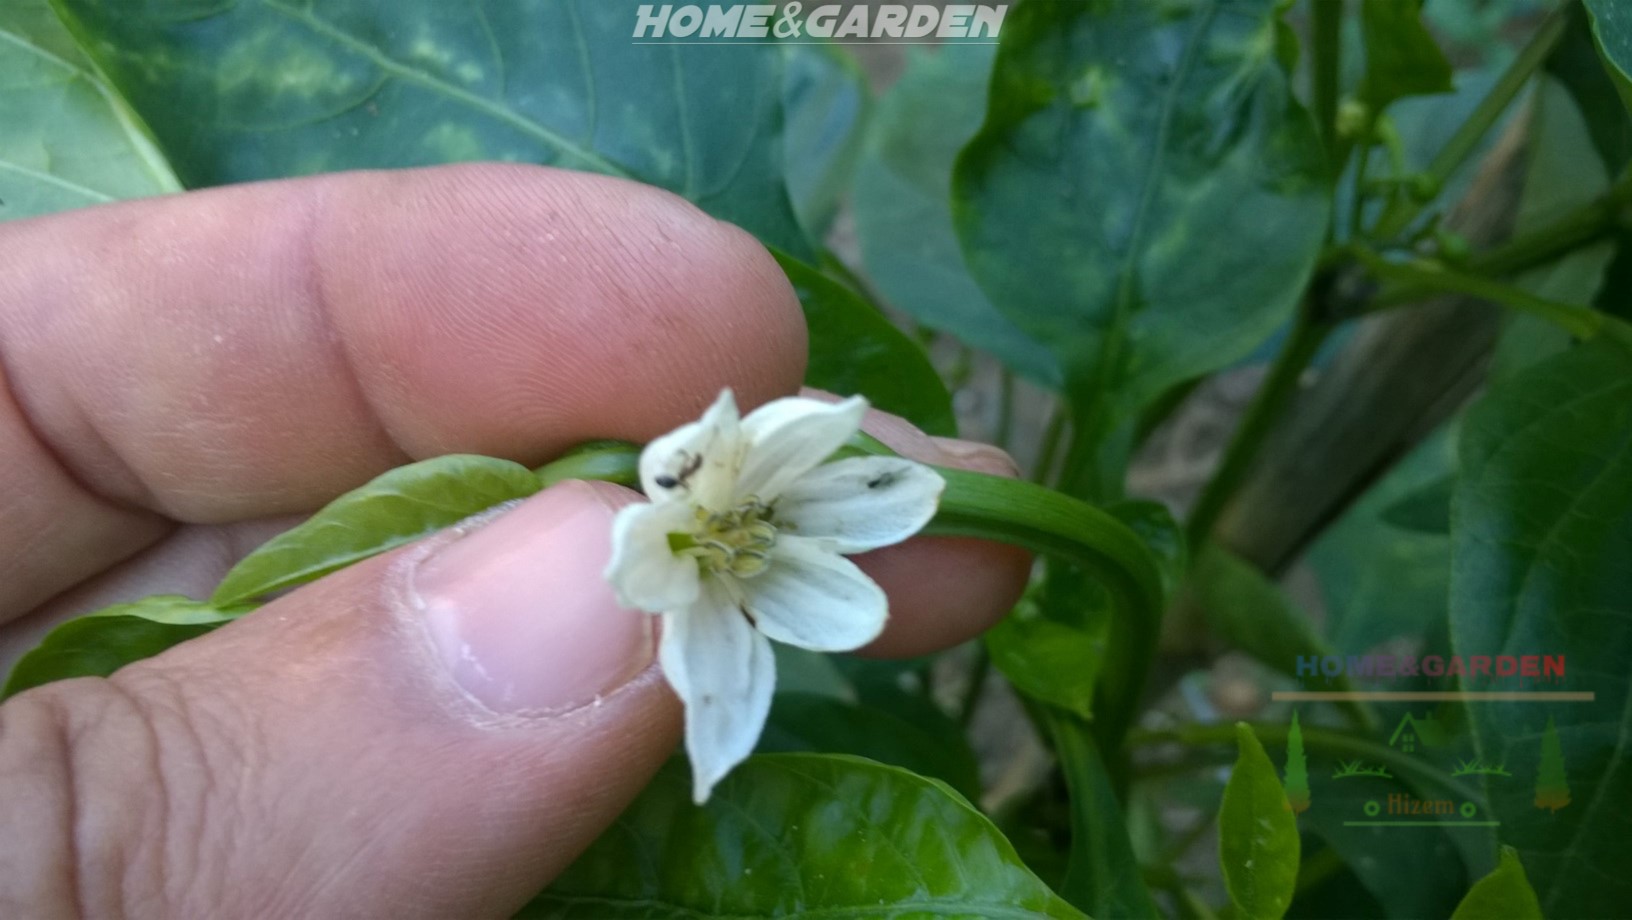 Pinch off all early blossoms that appear on your pepper plants. Don't worry, this won’t harm the plants. In fact, it helps them direct their energy into growing, and you will get lots of large fruits later in the season.